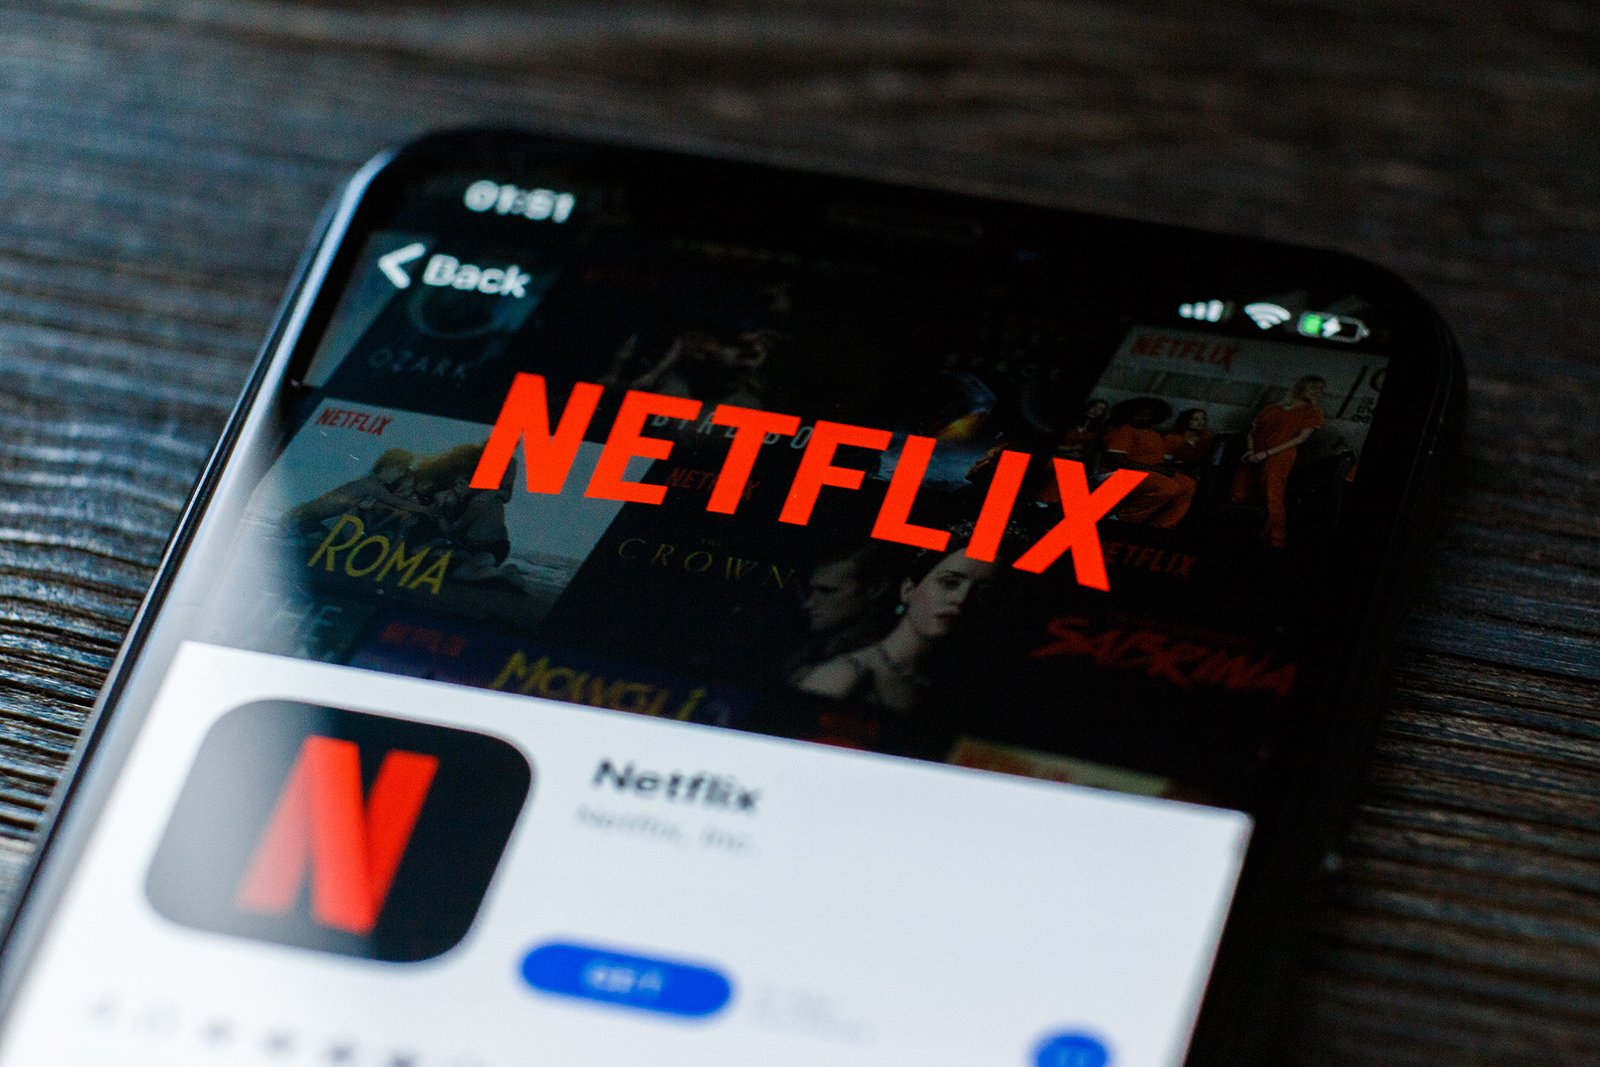 Netflix will release 55 new original movies and TV shows in March